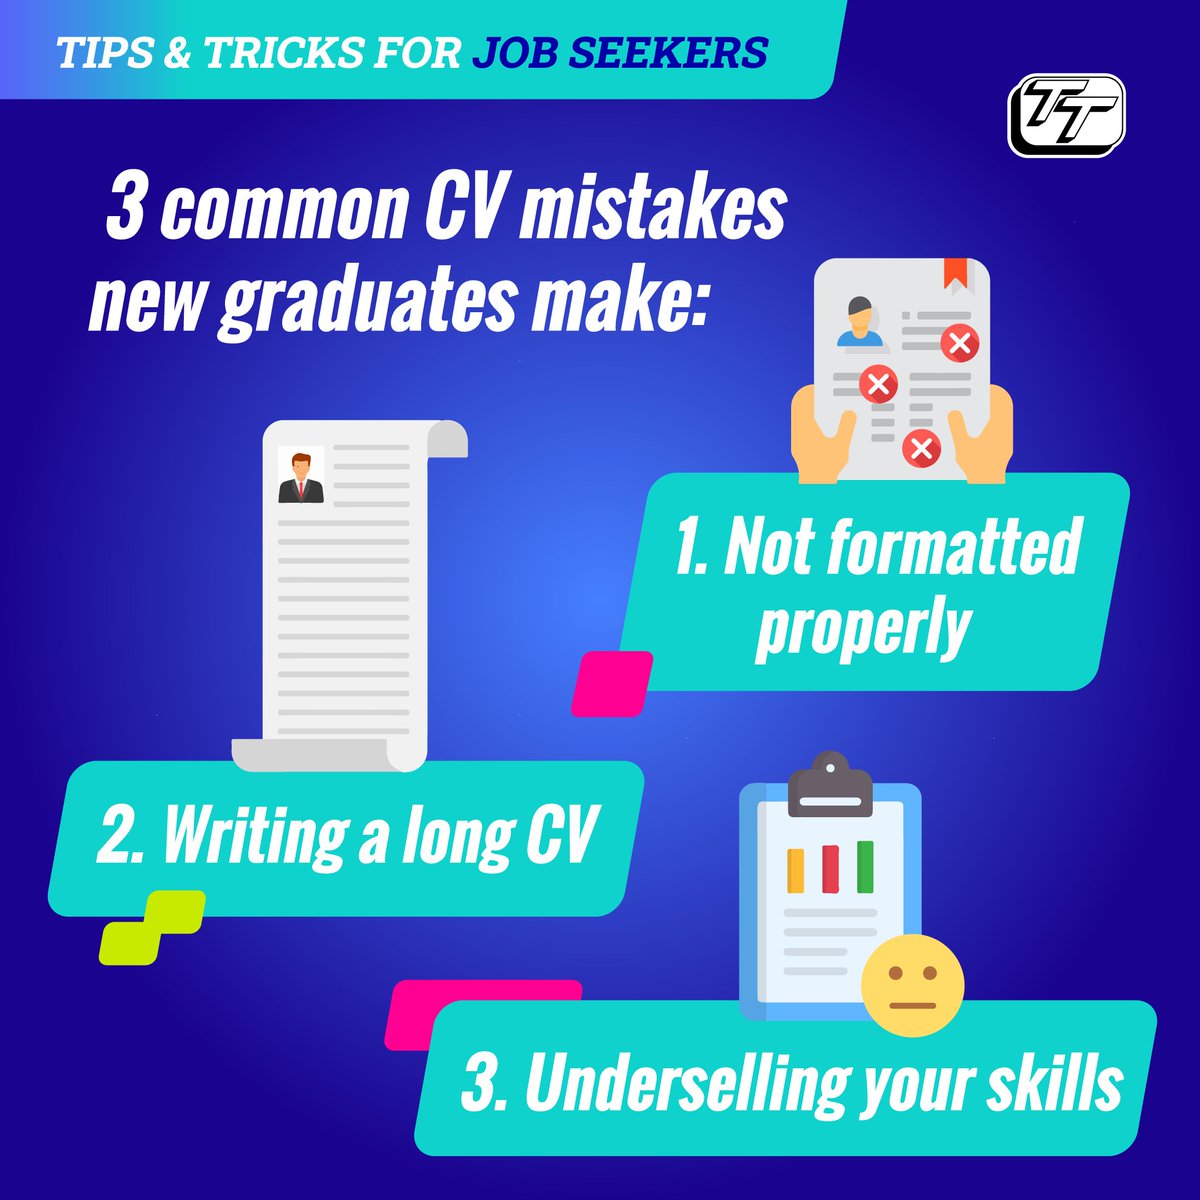 #Graduates, stand out from the crowd with a flawless CV and avoid these #CV blunders.

#CVtips